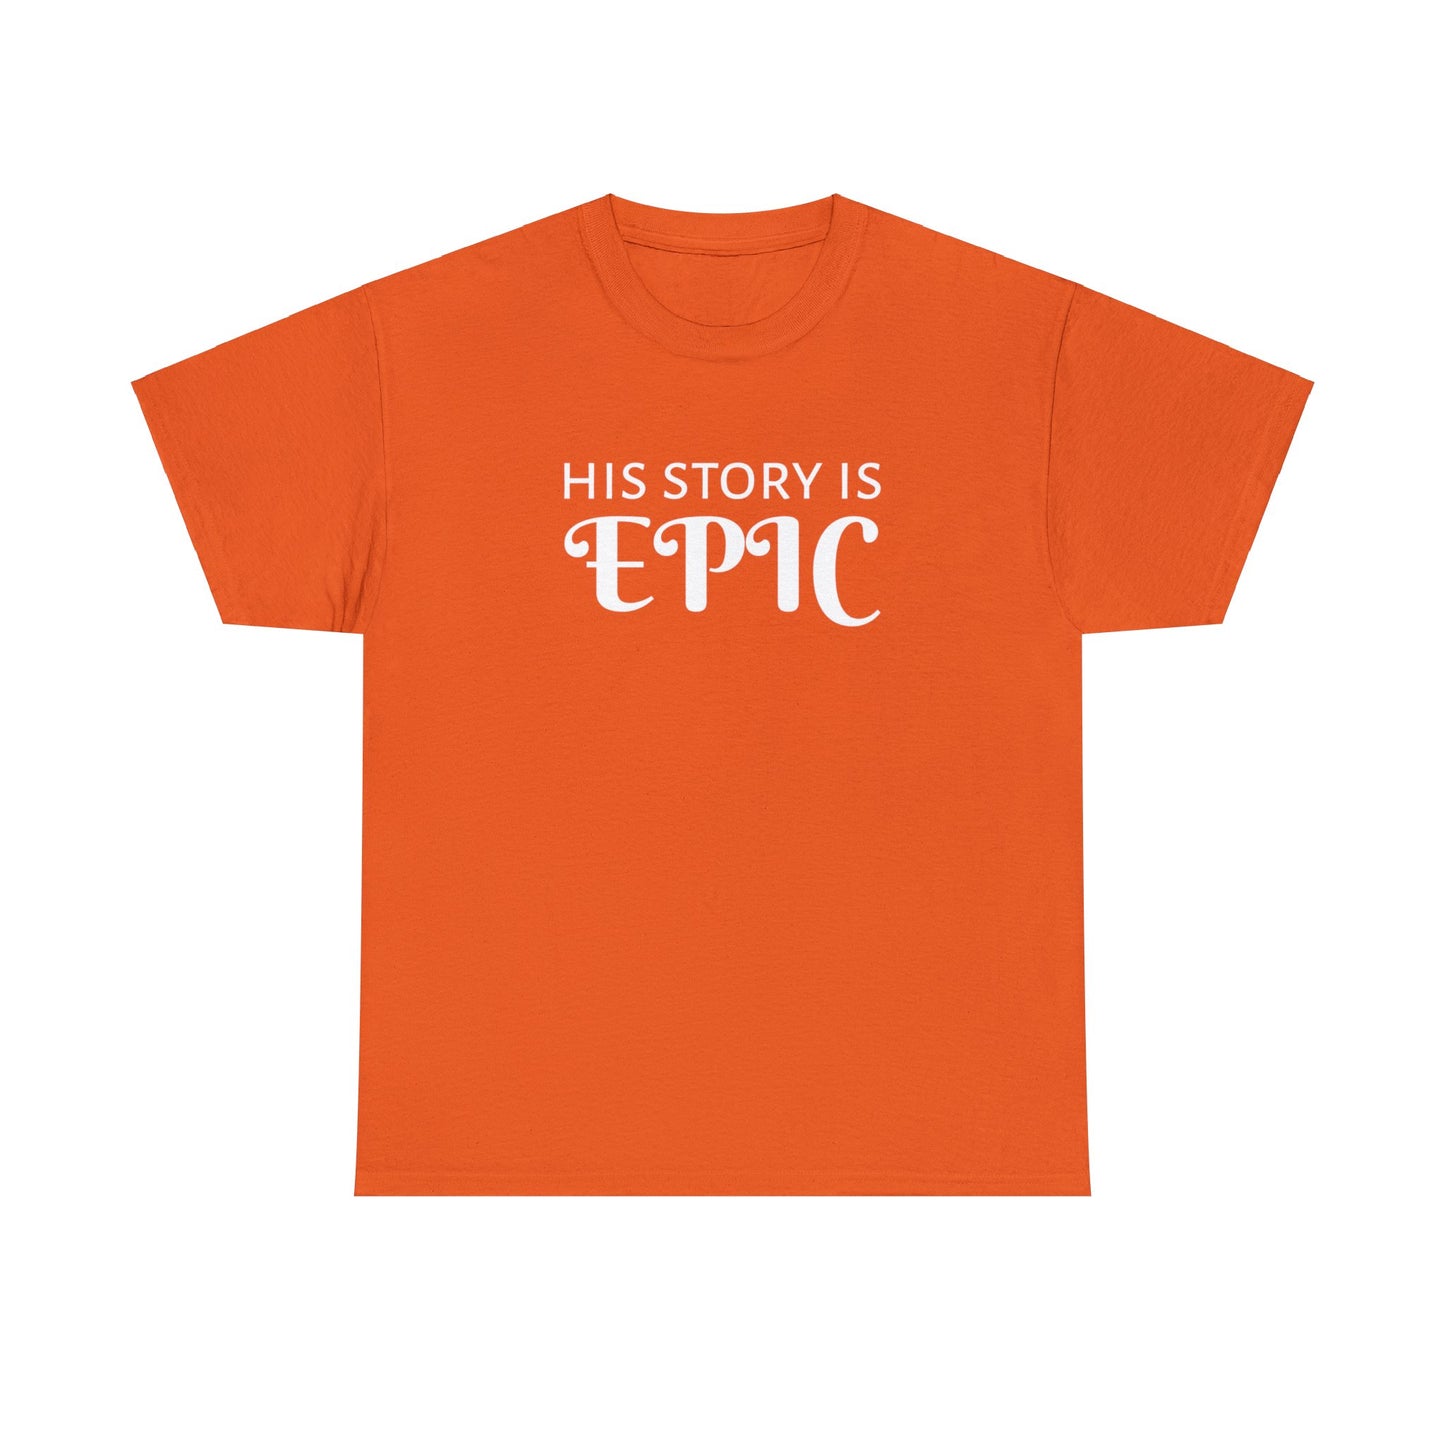 His Story is EPIC t-shirt